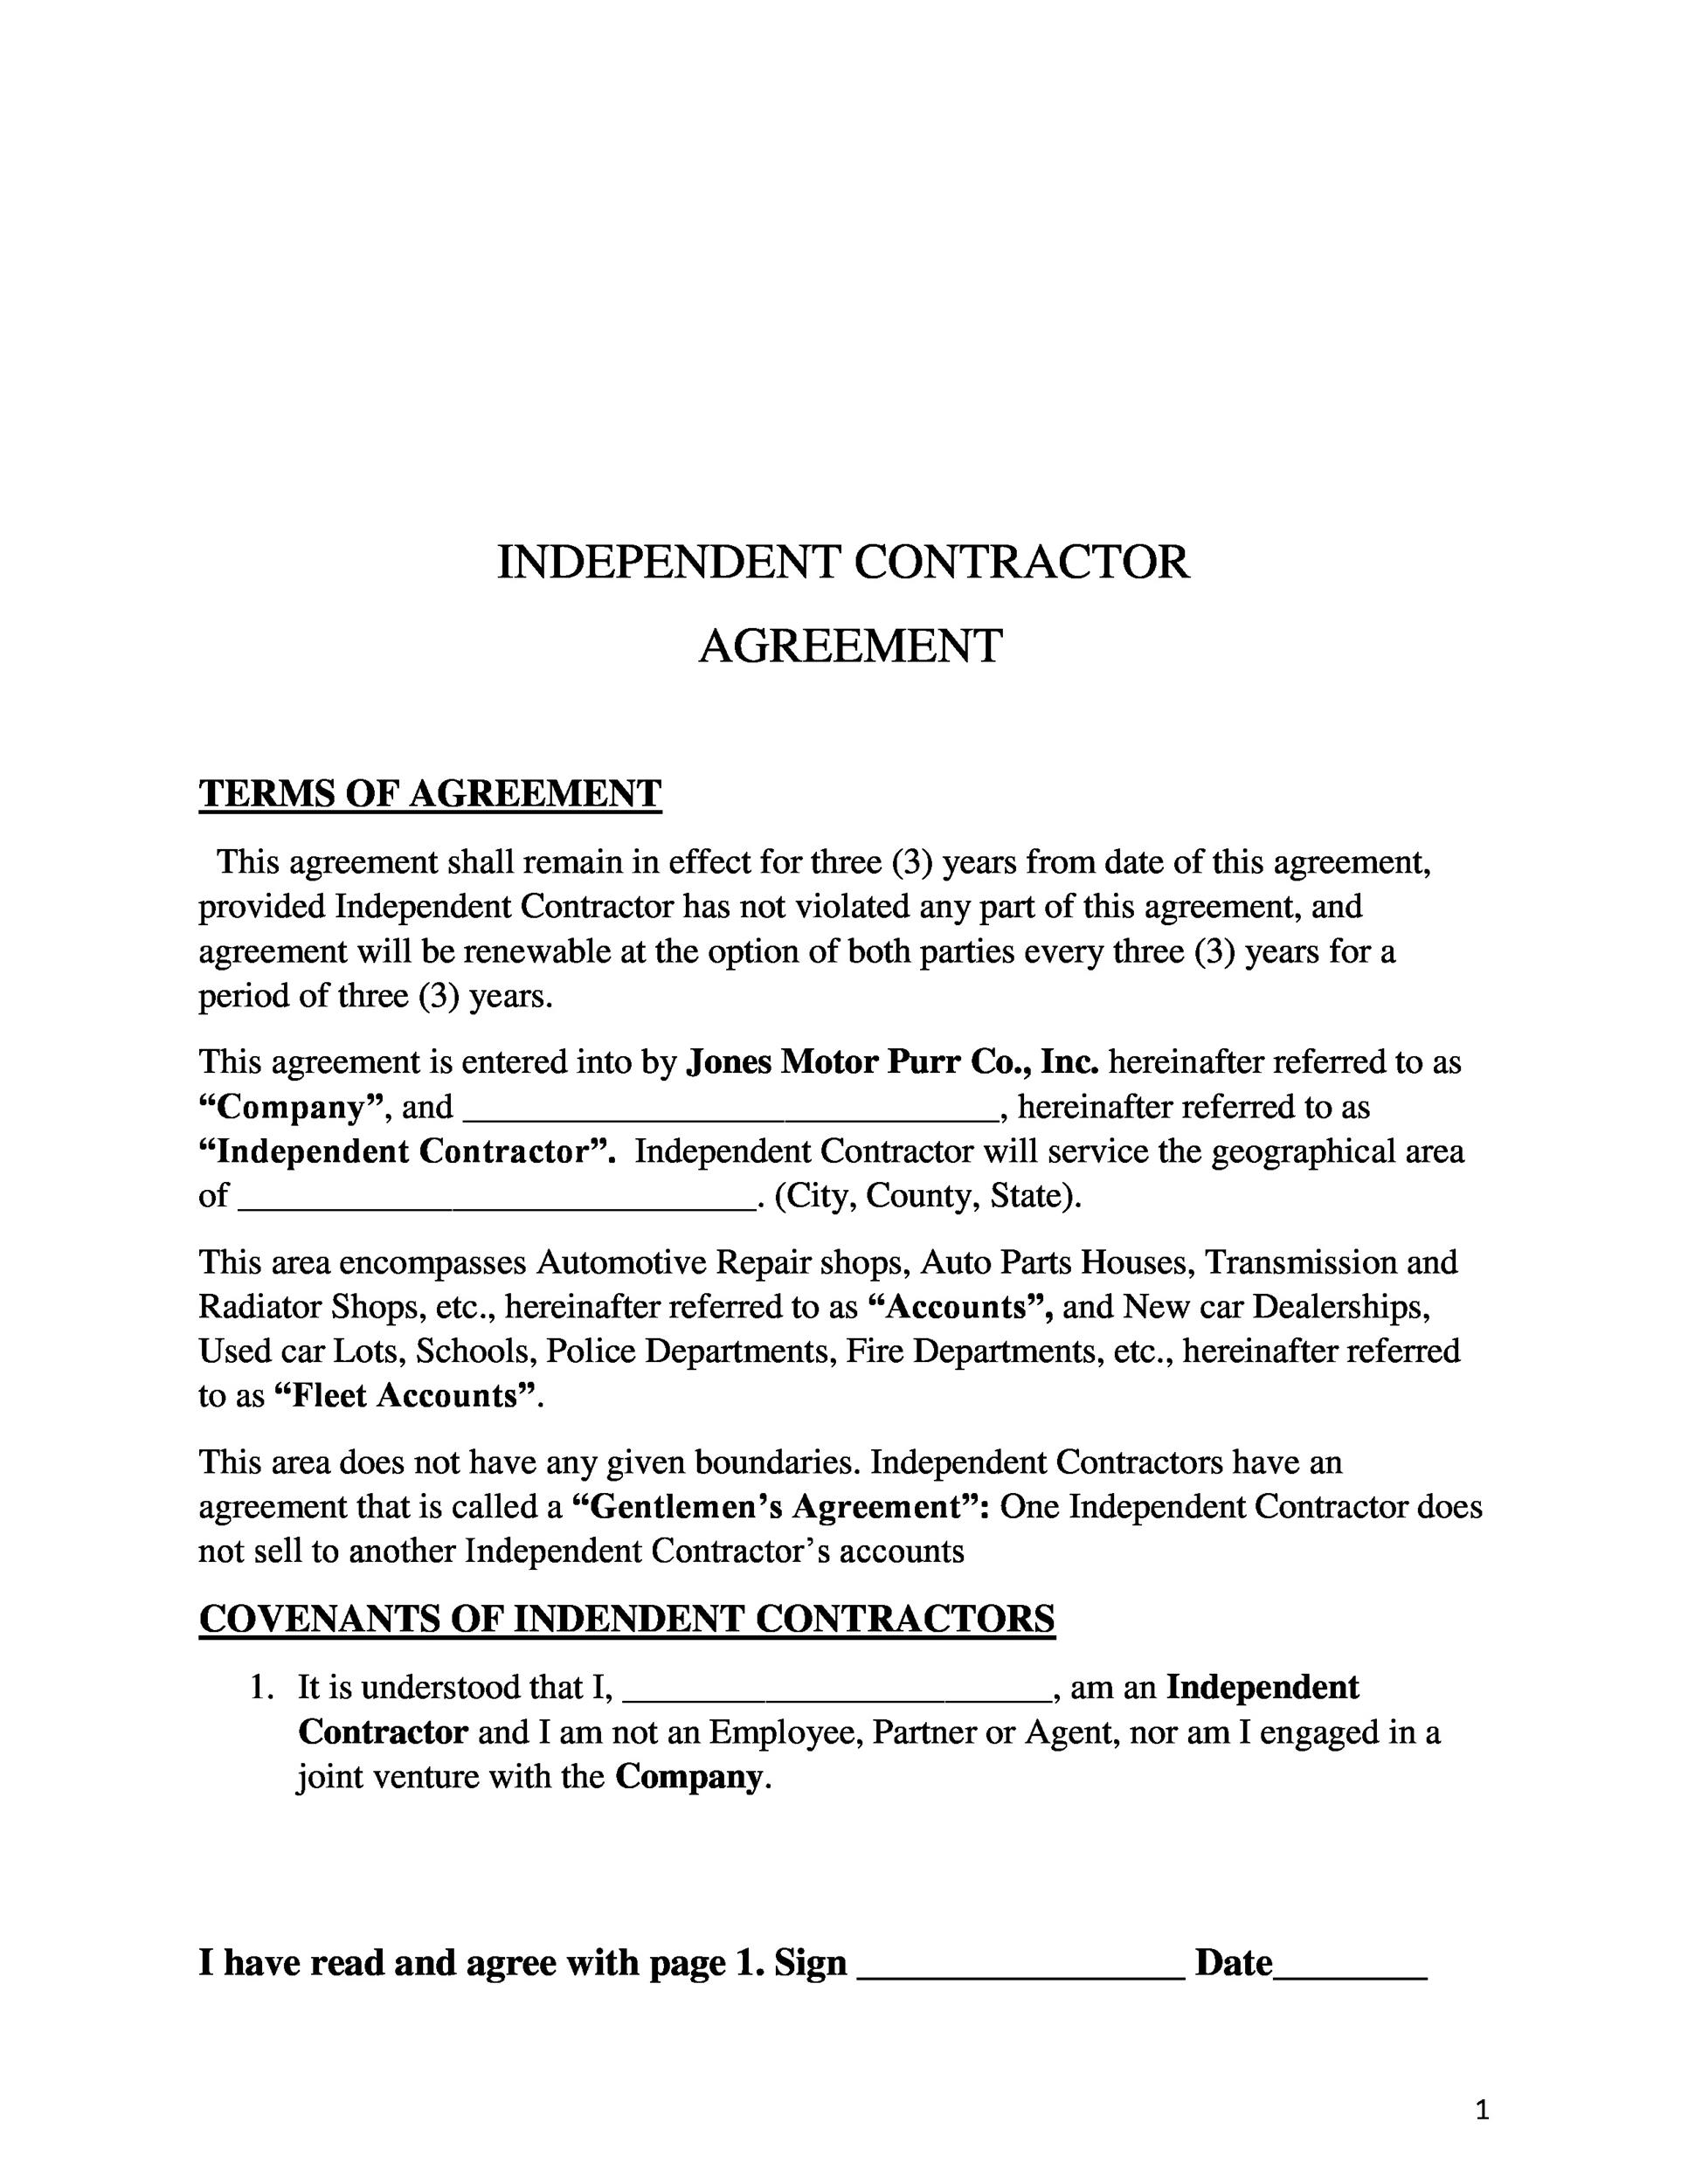 Free independent contractor agreement 35